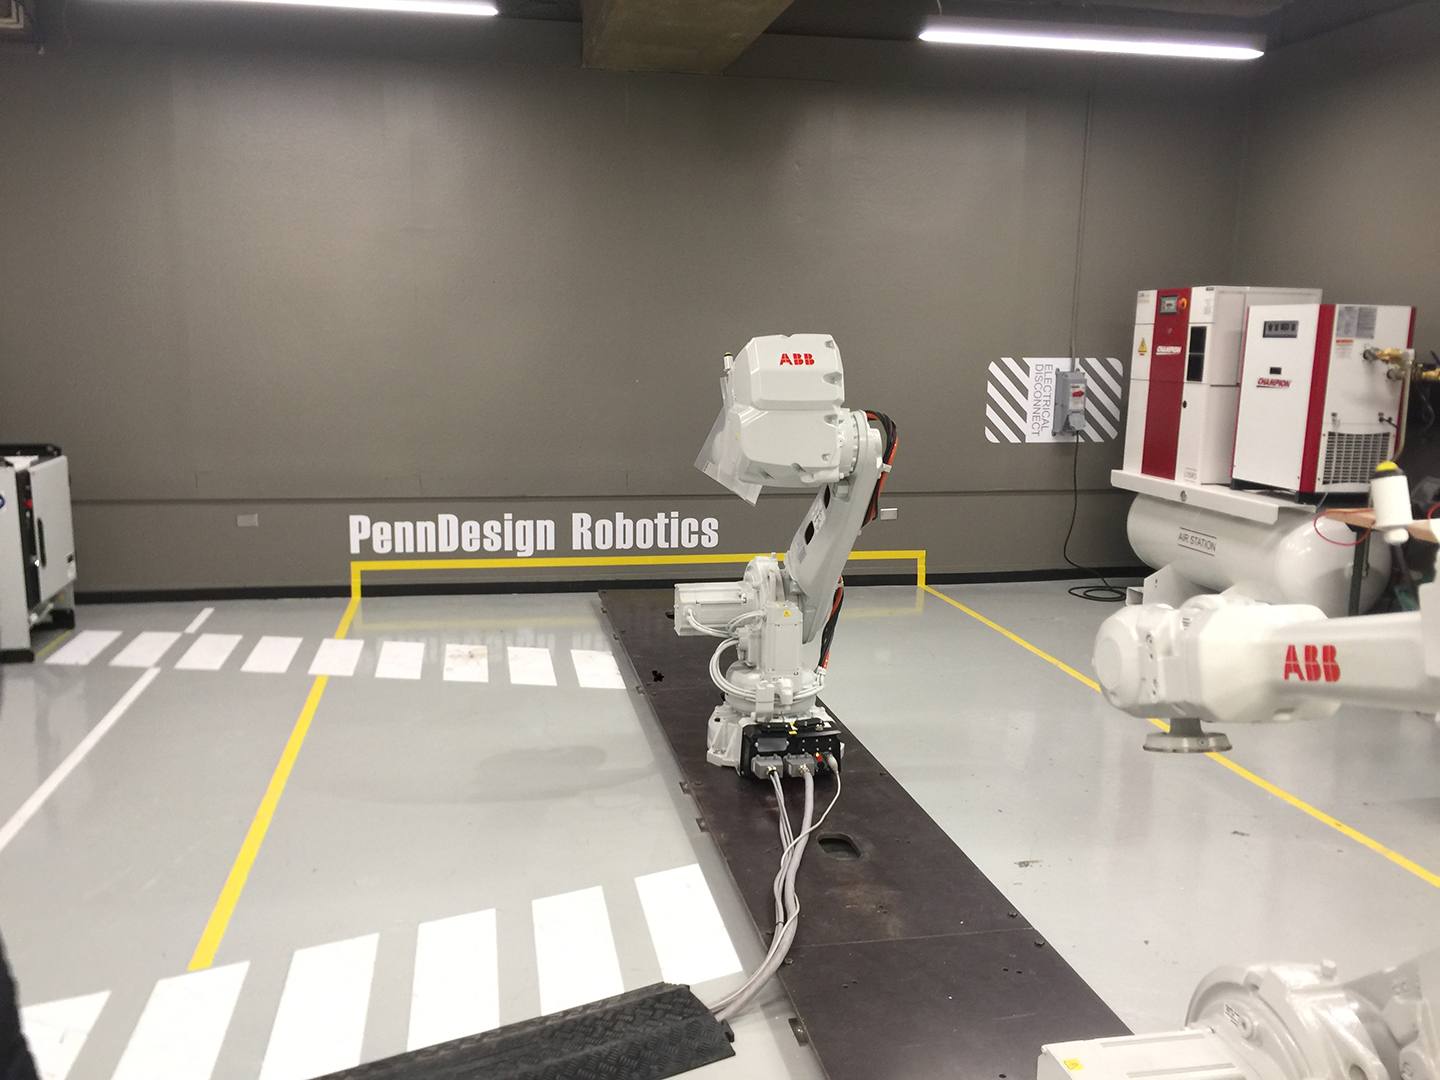 Robot stands in place at University of Pennsylvania's PennDesign Robotics Laboratory